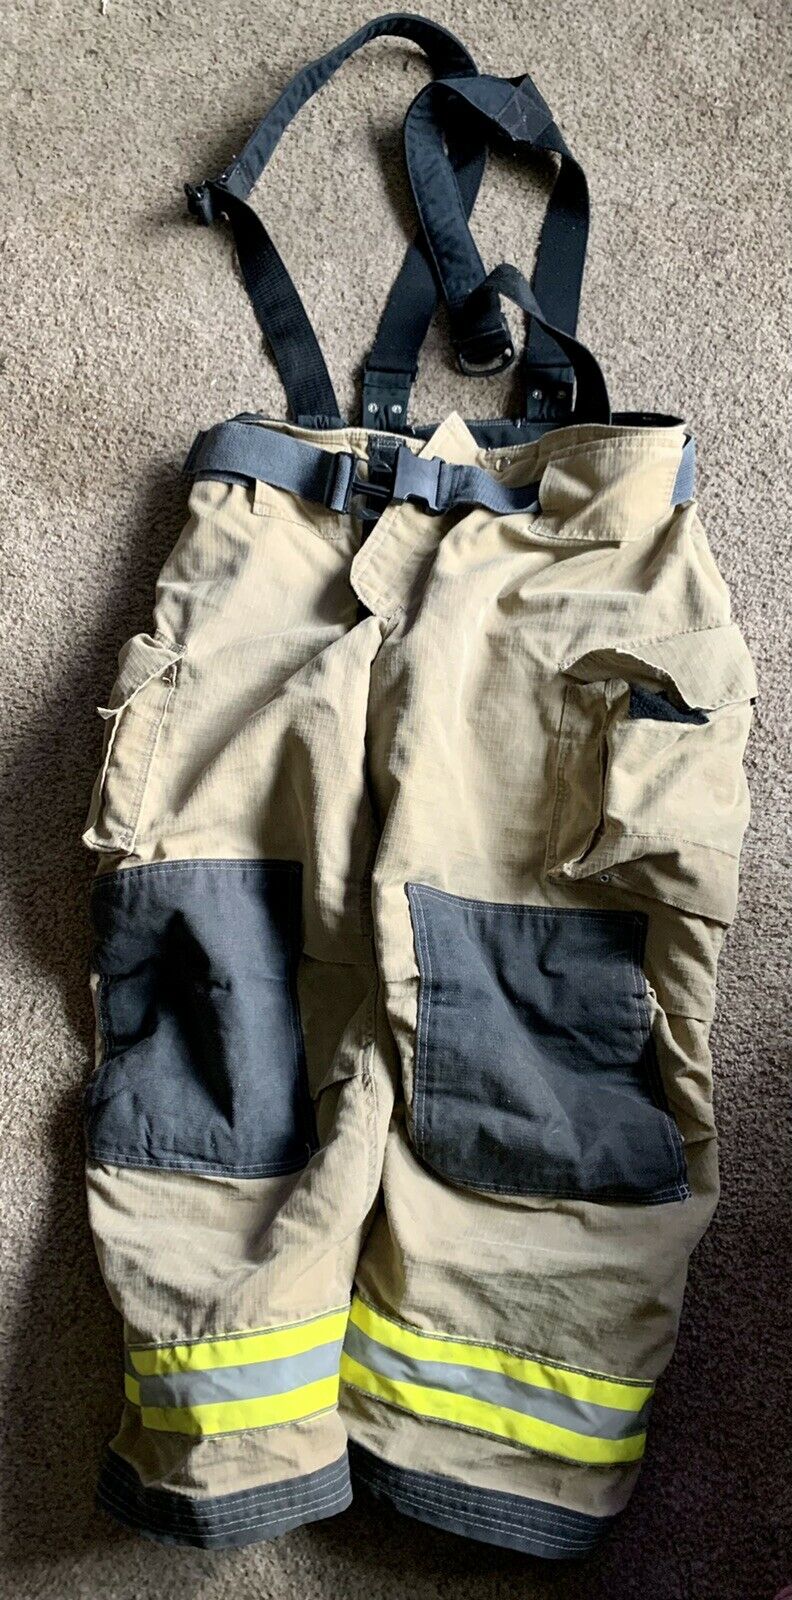 Cairns Reaxtion Turnout Bunker Pants 40 X 30 Used - Great Condition